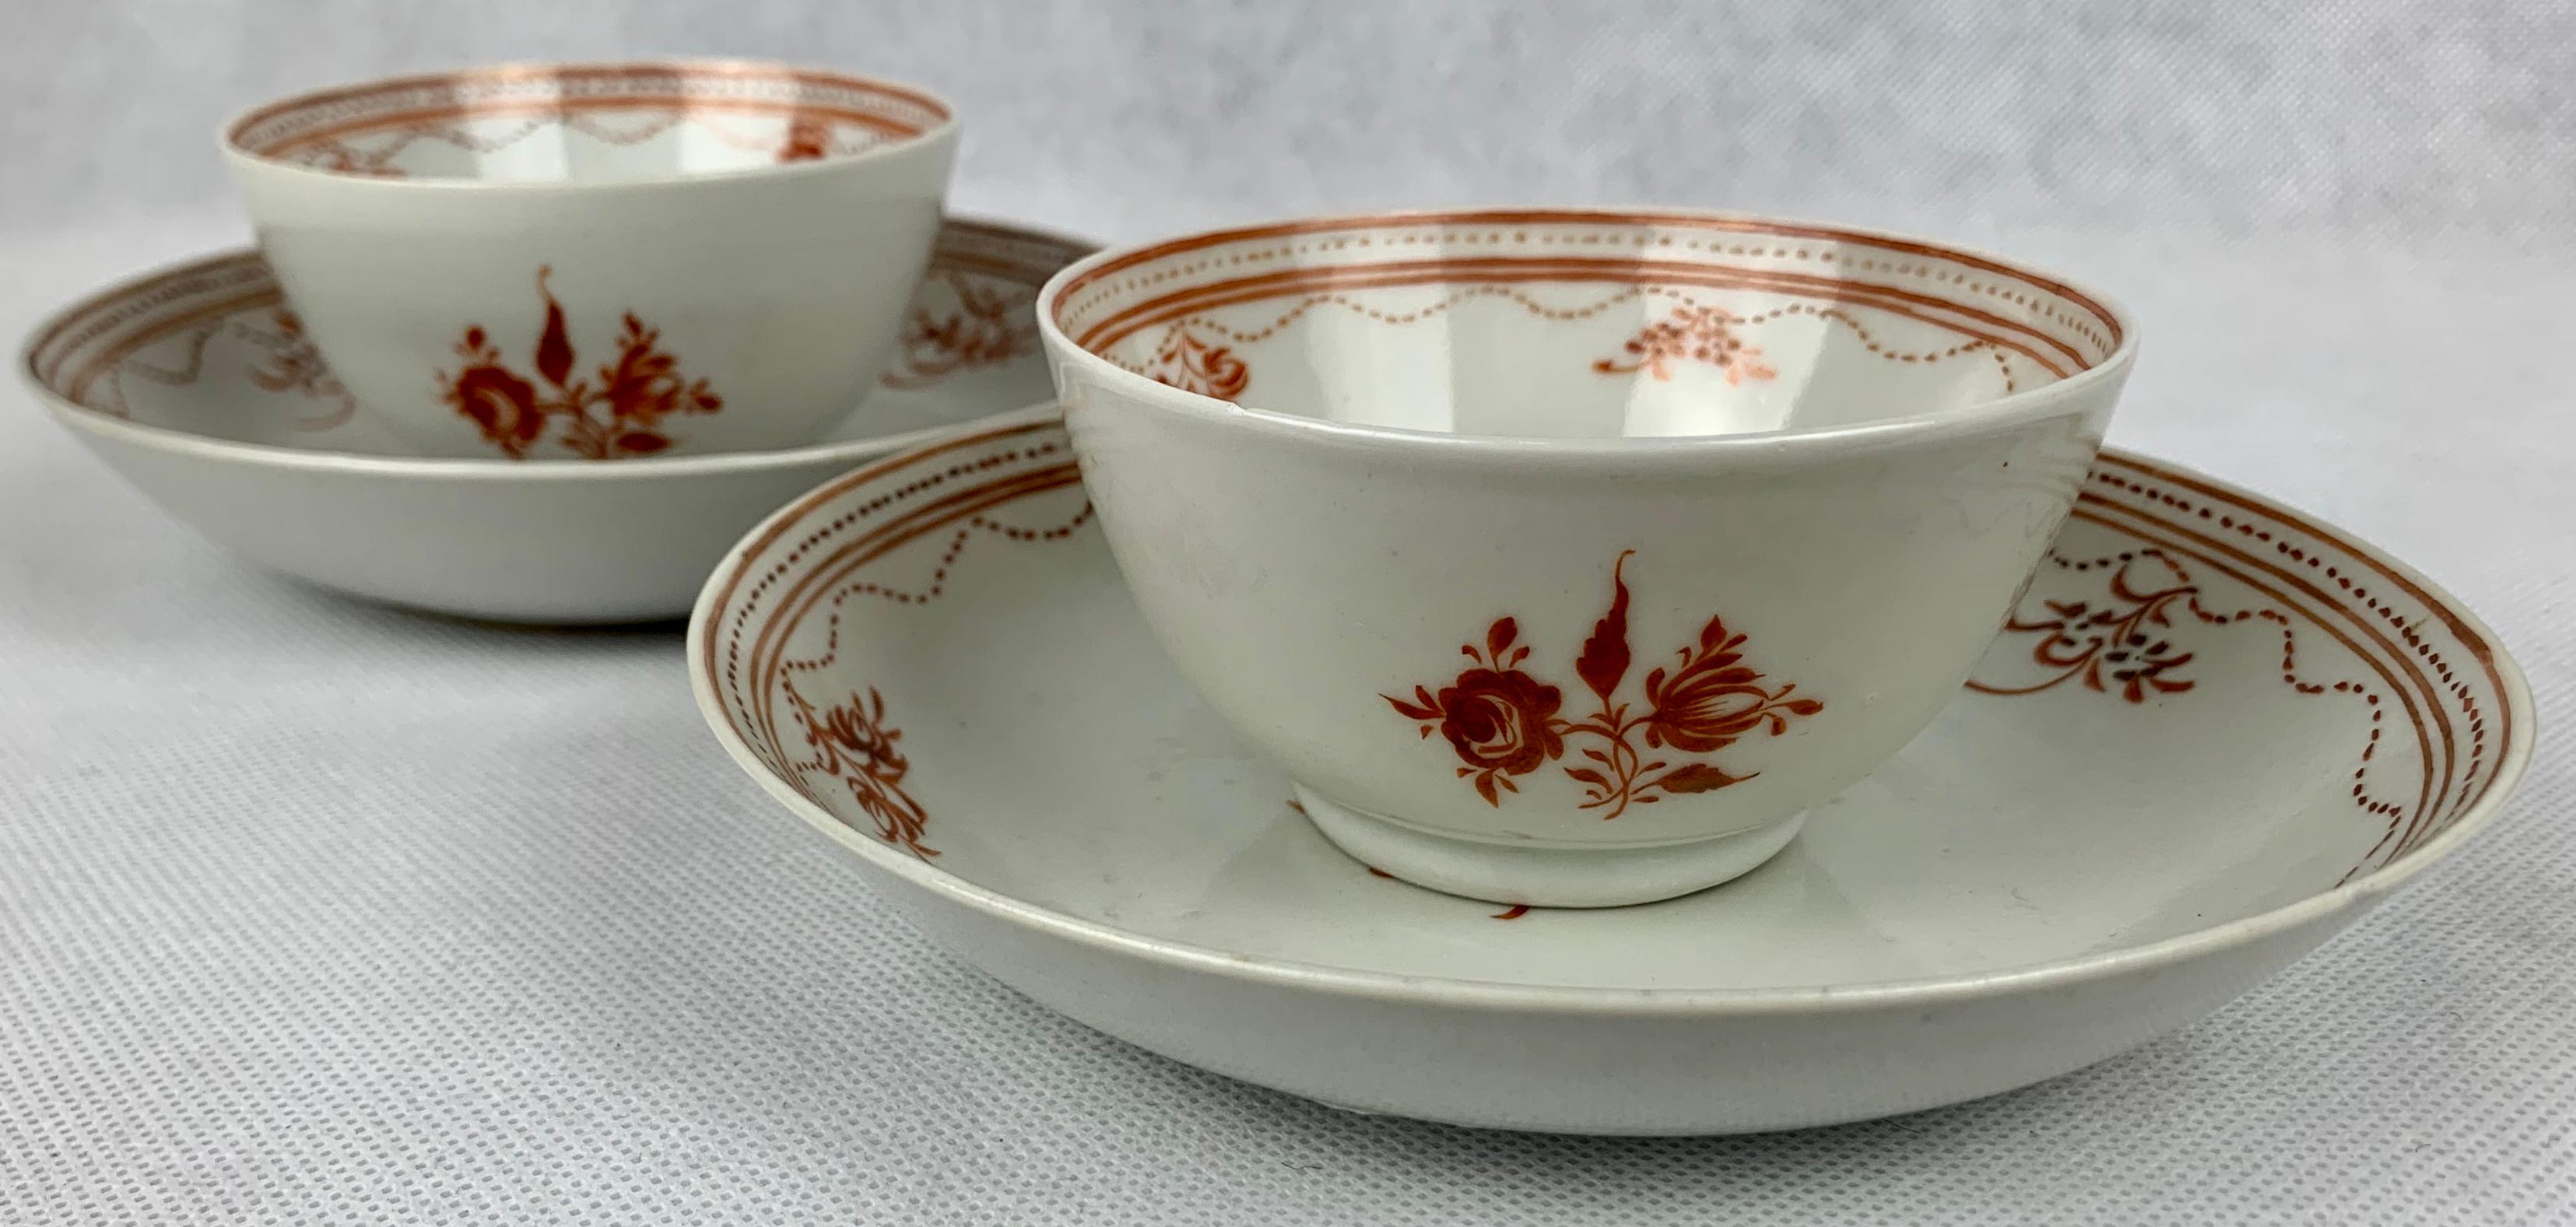 Pair of late 18th century handleless Chinese export cups and saucers. Hand decorated in tones of sepia with roses and other flowers. The borders are delicately decorated with a double line enclosing dots and a swagged dotted design. 
Measurements: